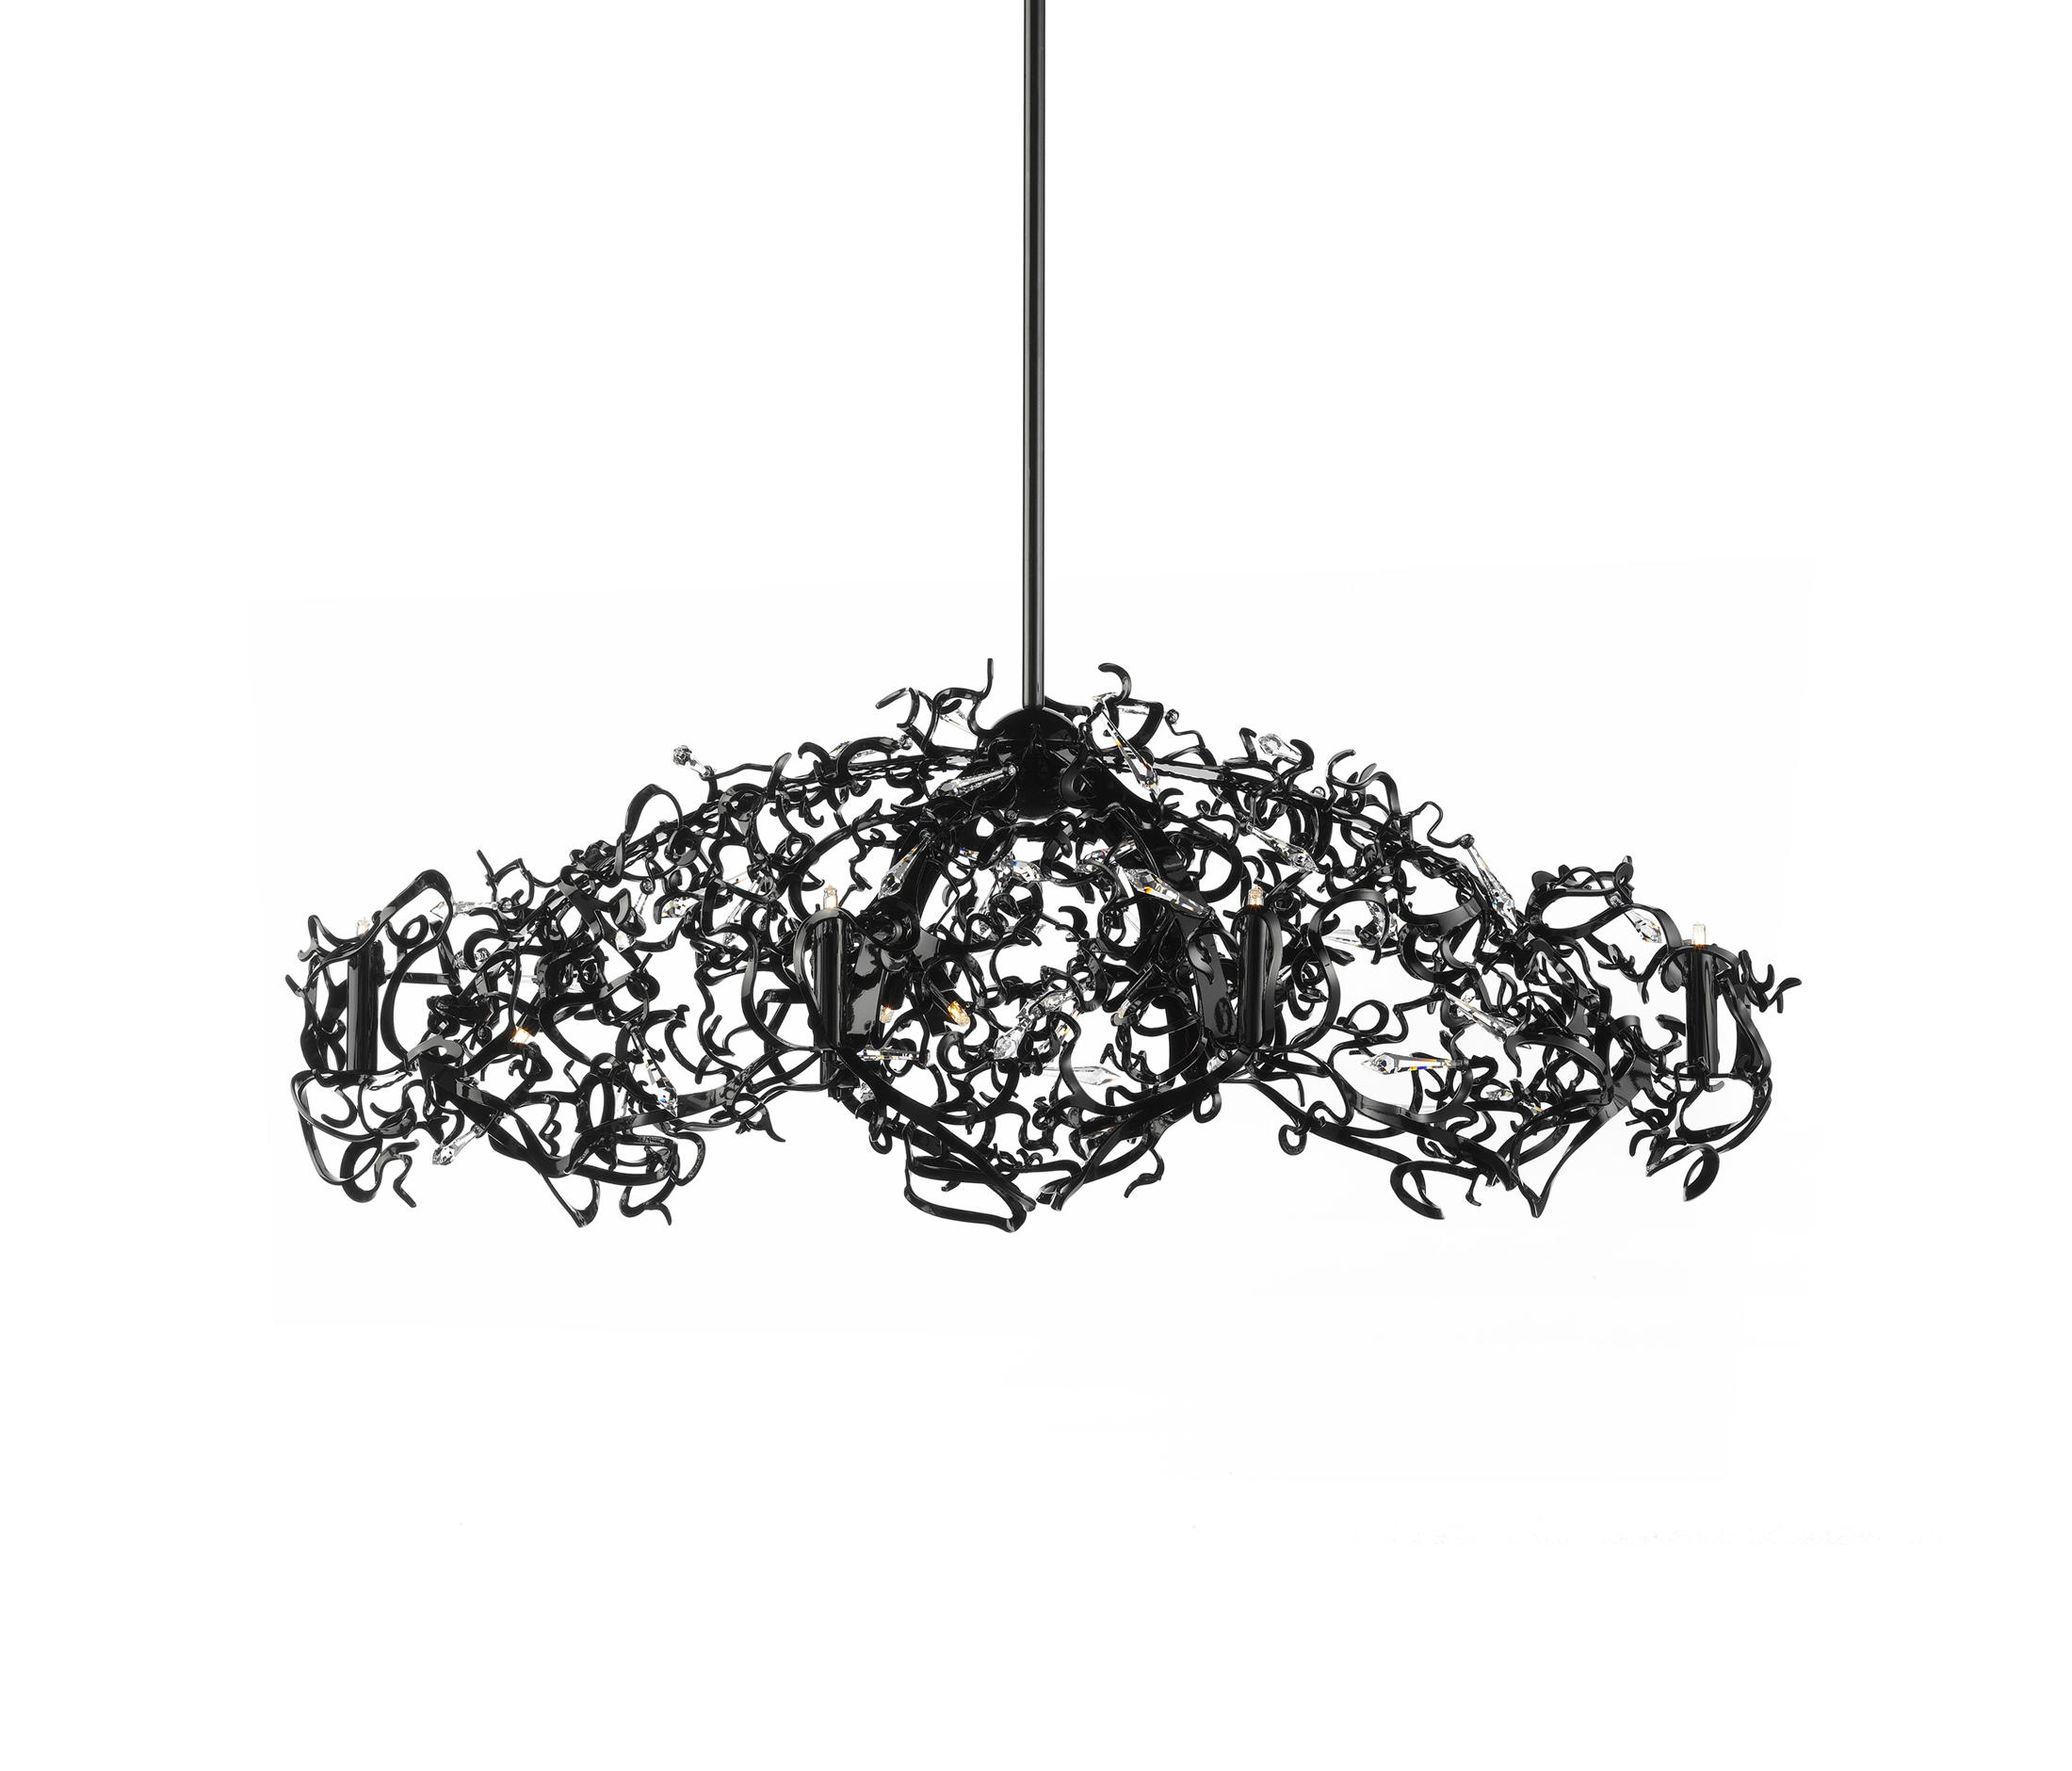 ICY LADY CHANDELIER - Ceiling suspended chandeliers from Brand van ...